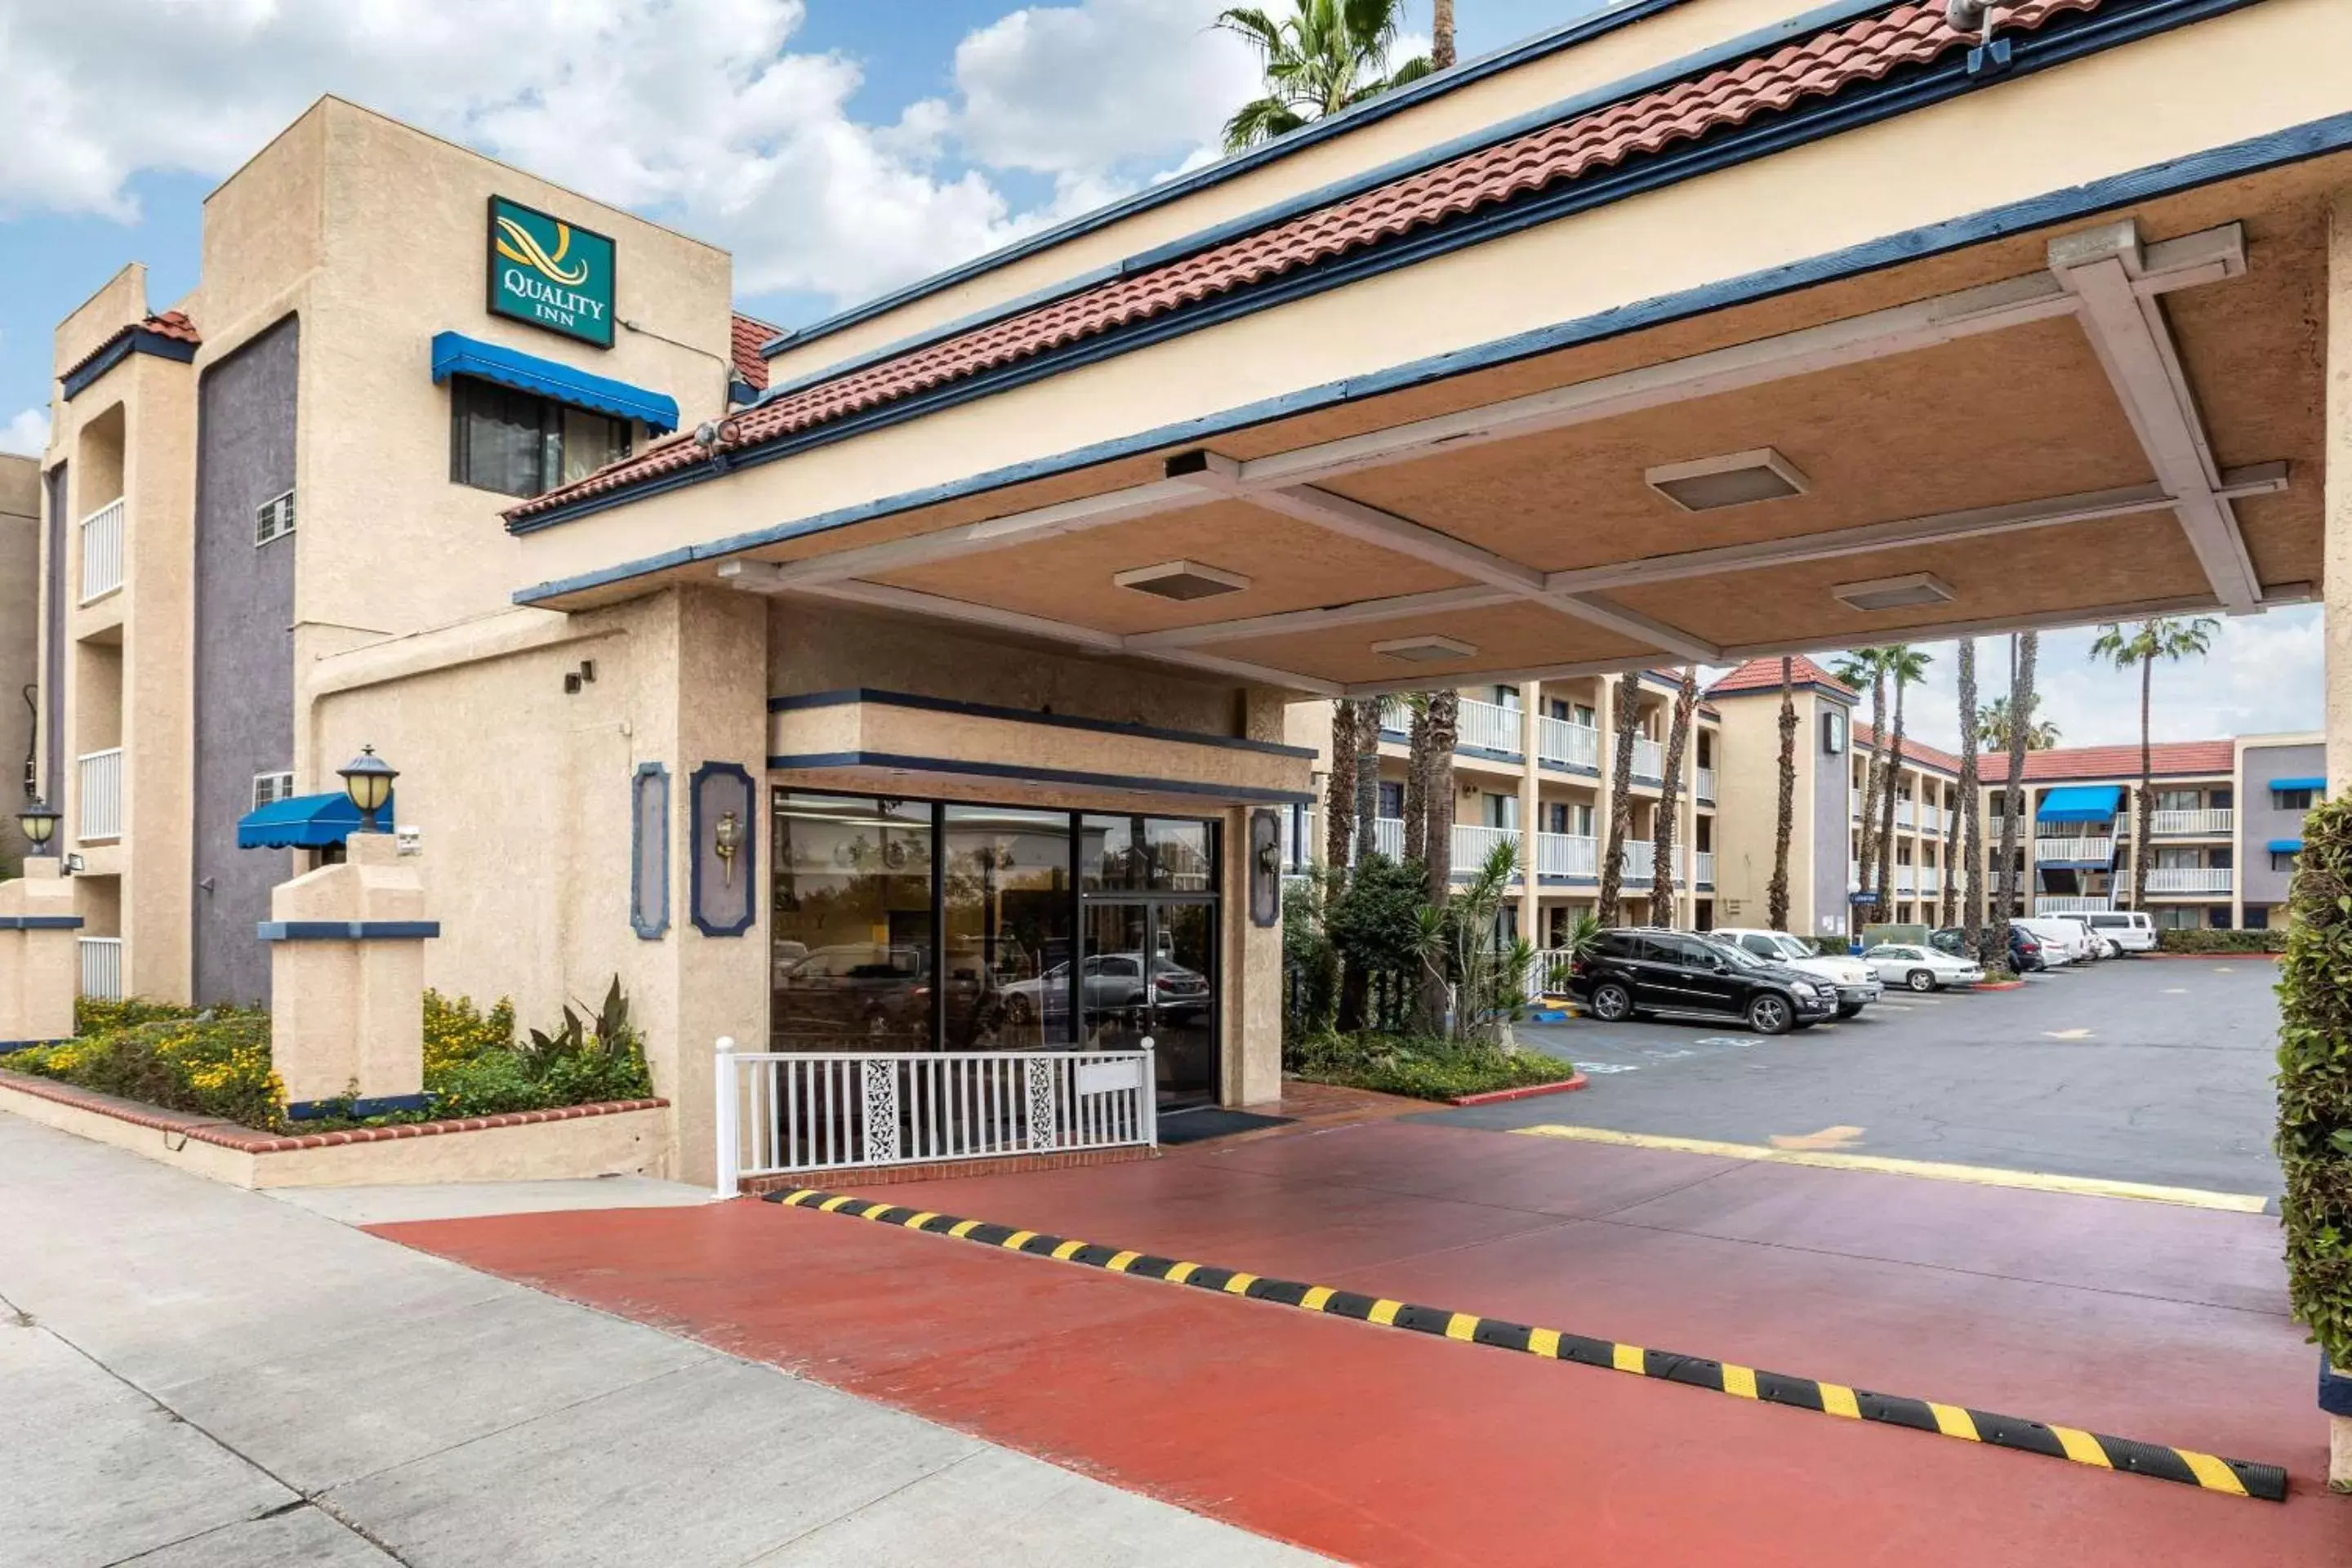 Property building in Quality Inn Lomita-Los Angeles South Bay